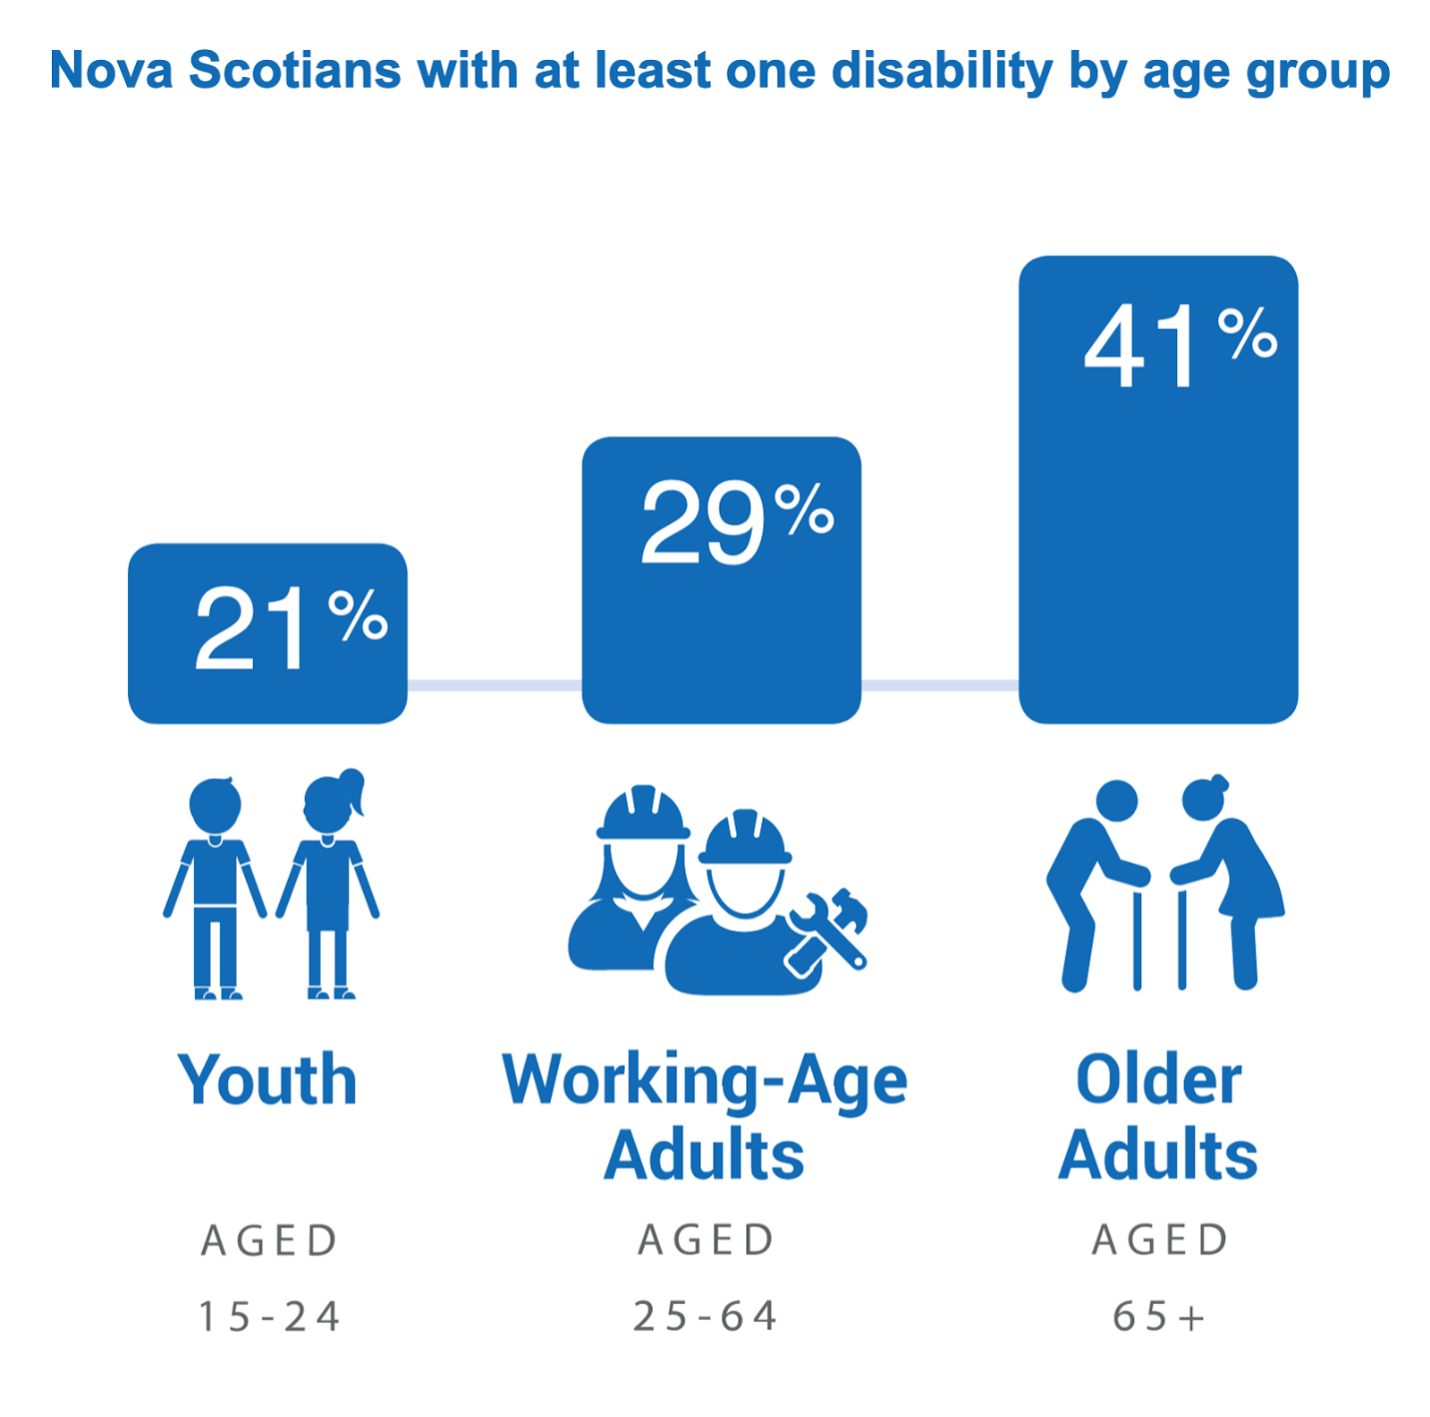 Nova Scotians with at least one disability by age group. Youth aged 15-24: 21% Working-Age Adults aged 25-64: 29% Older adults aged 65+: 41%.